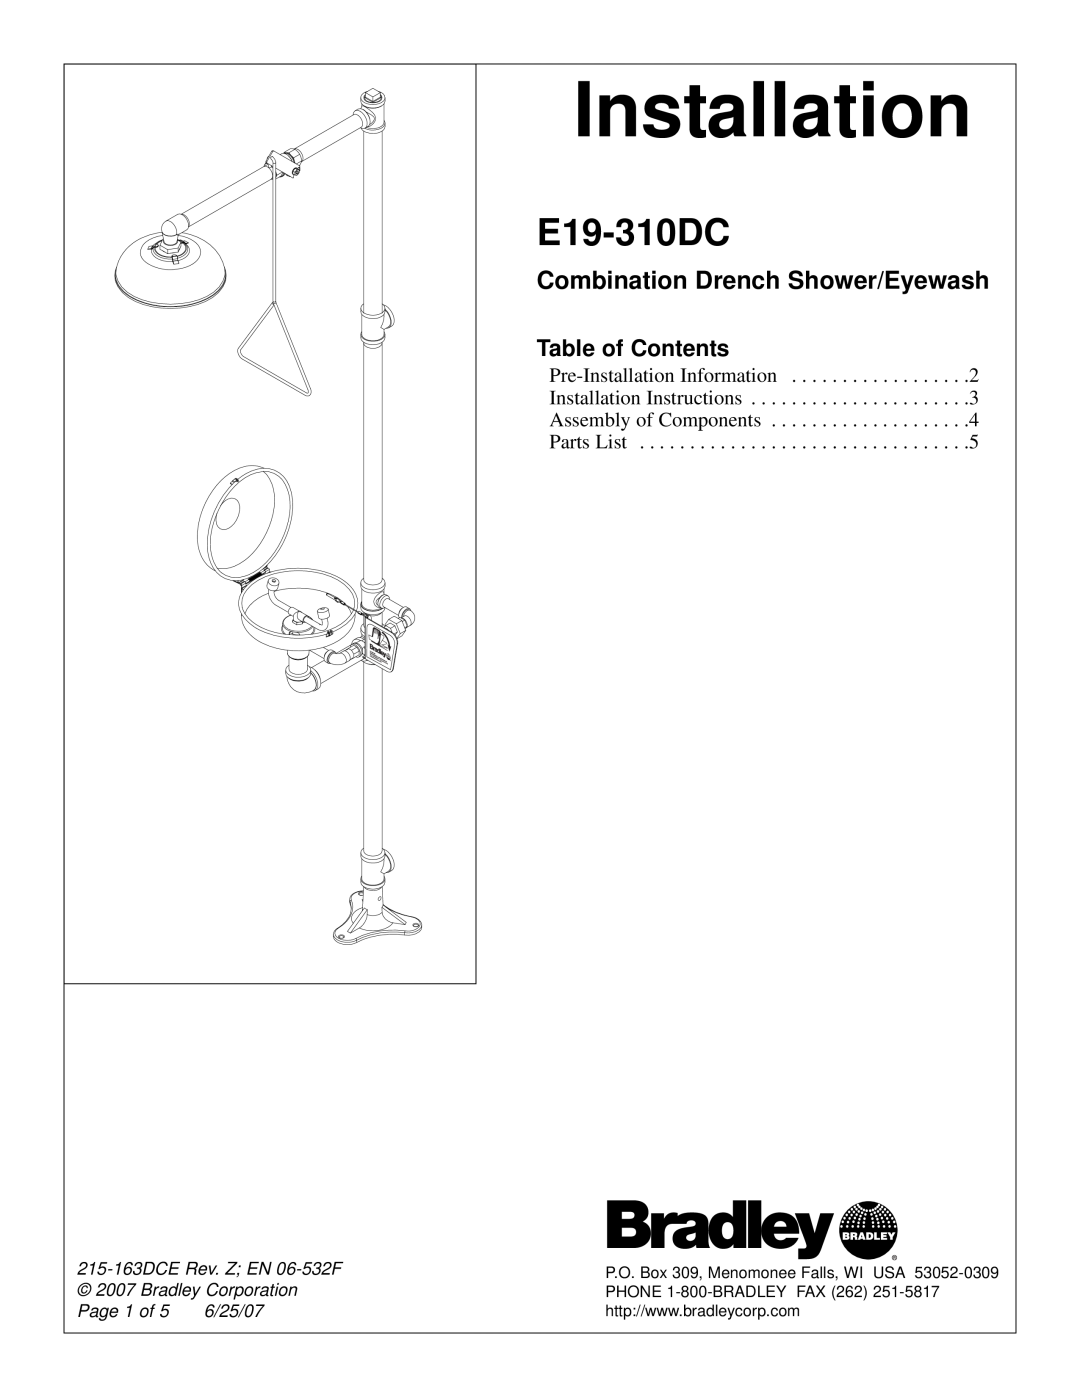 Bradley Smoker E19-310DC installation instructions Table of Contents, Installation, Combination Drench Shower/Eyewash 